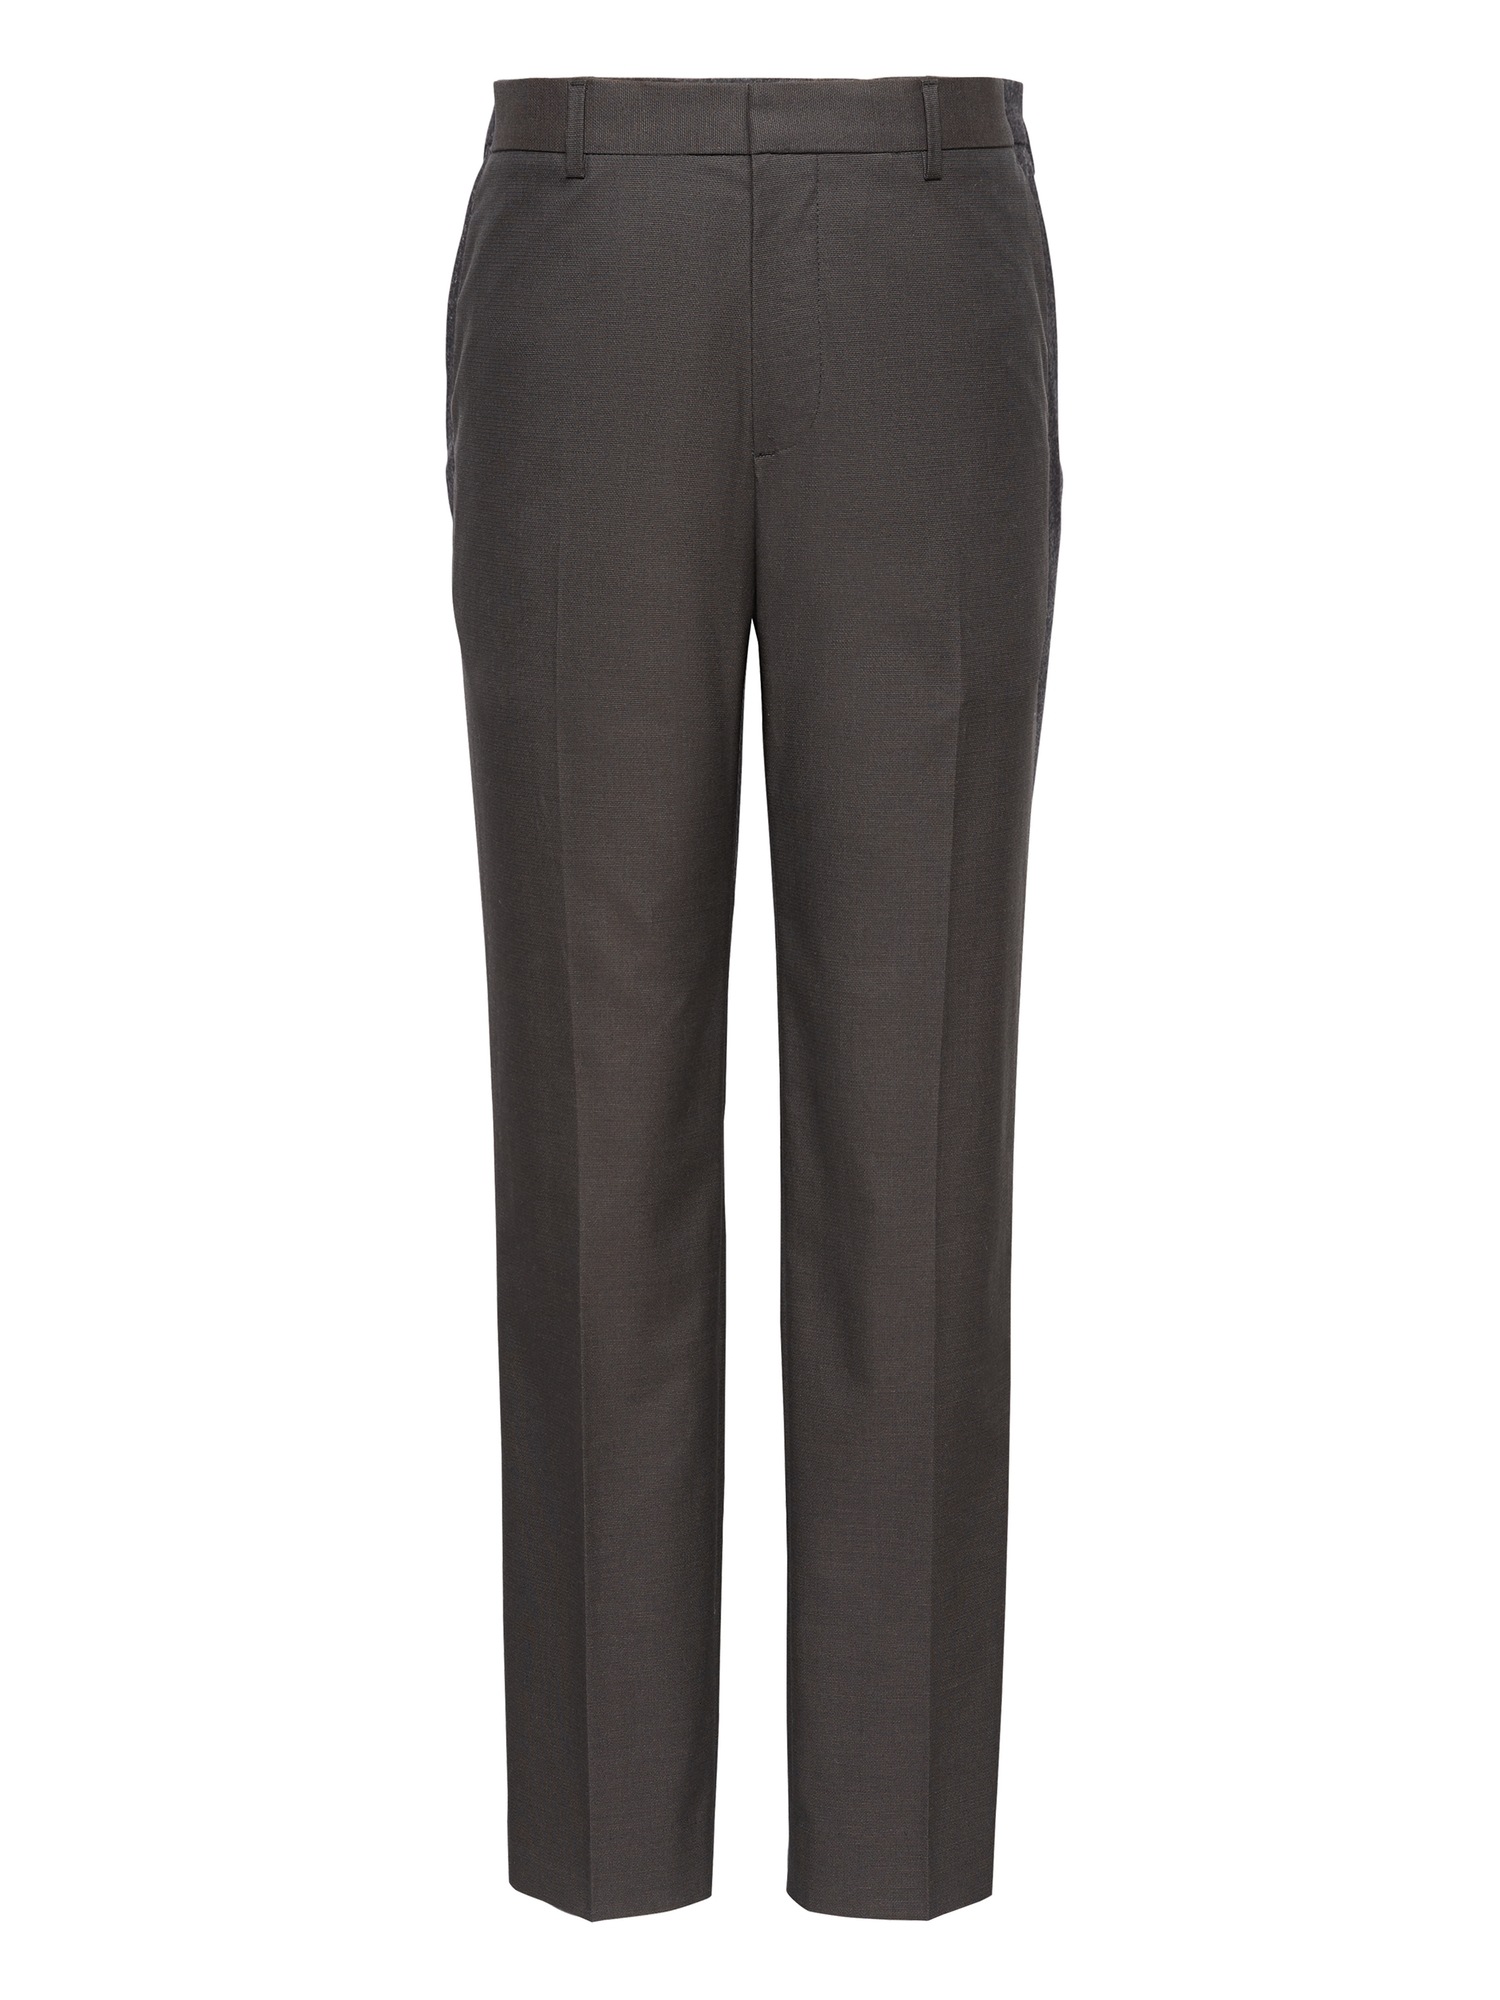 Athletic Tapered Non-Iron Stretch Cotton Solid Pant